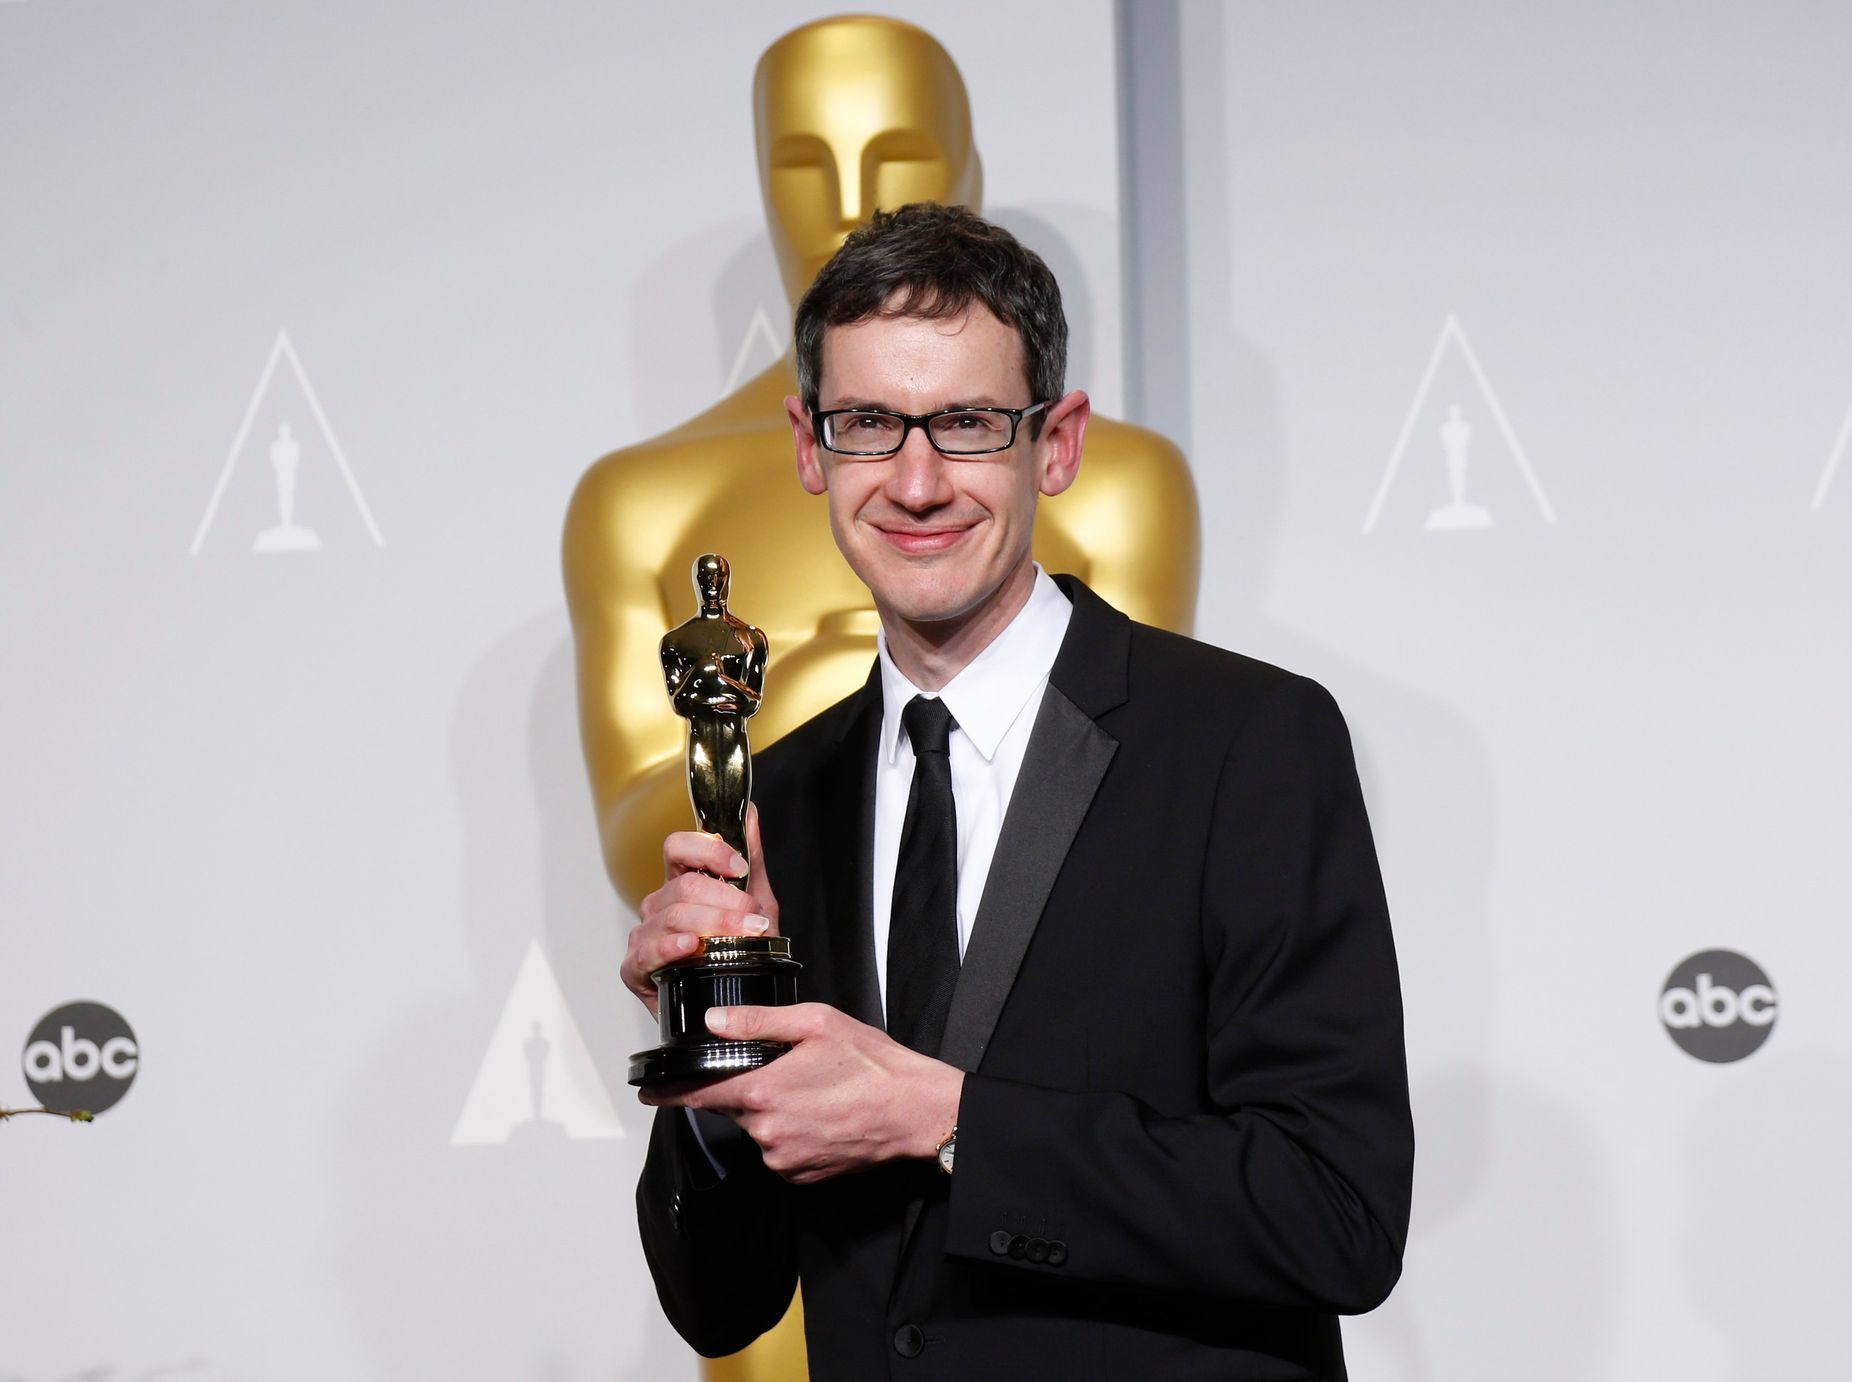 Price holds his Oscar for best original score for the film &quot;Gravity&quot; at the 86th Academy Awards in Hollywood